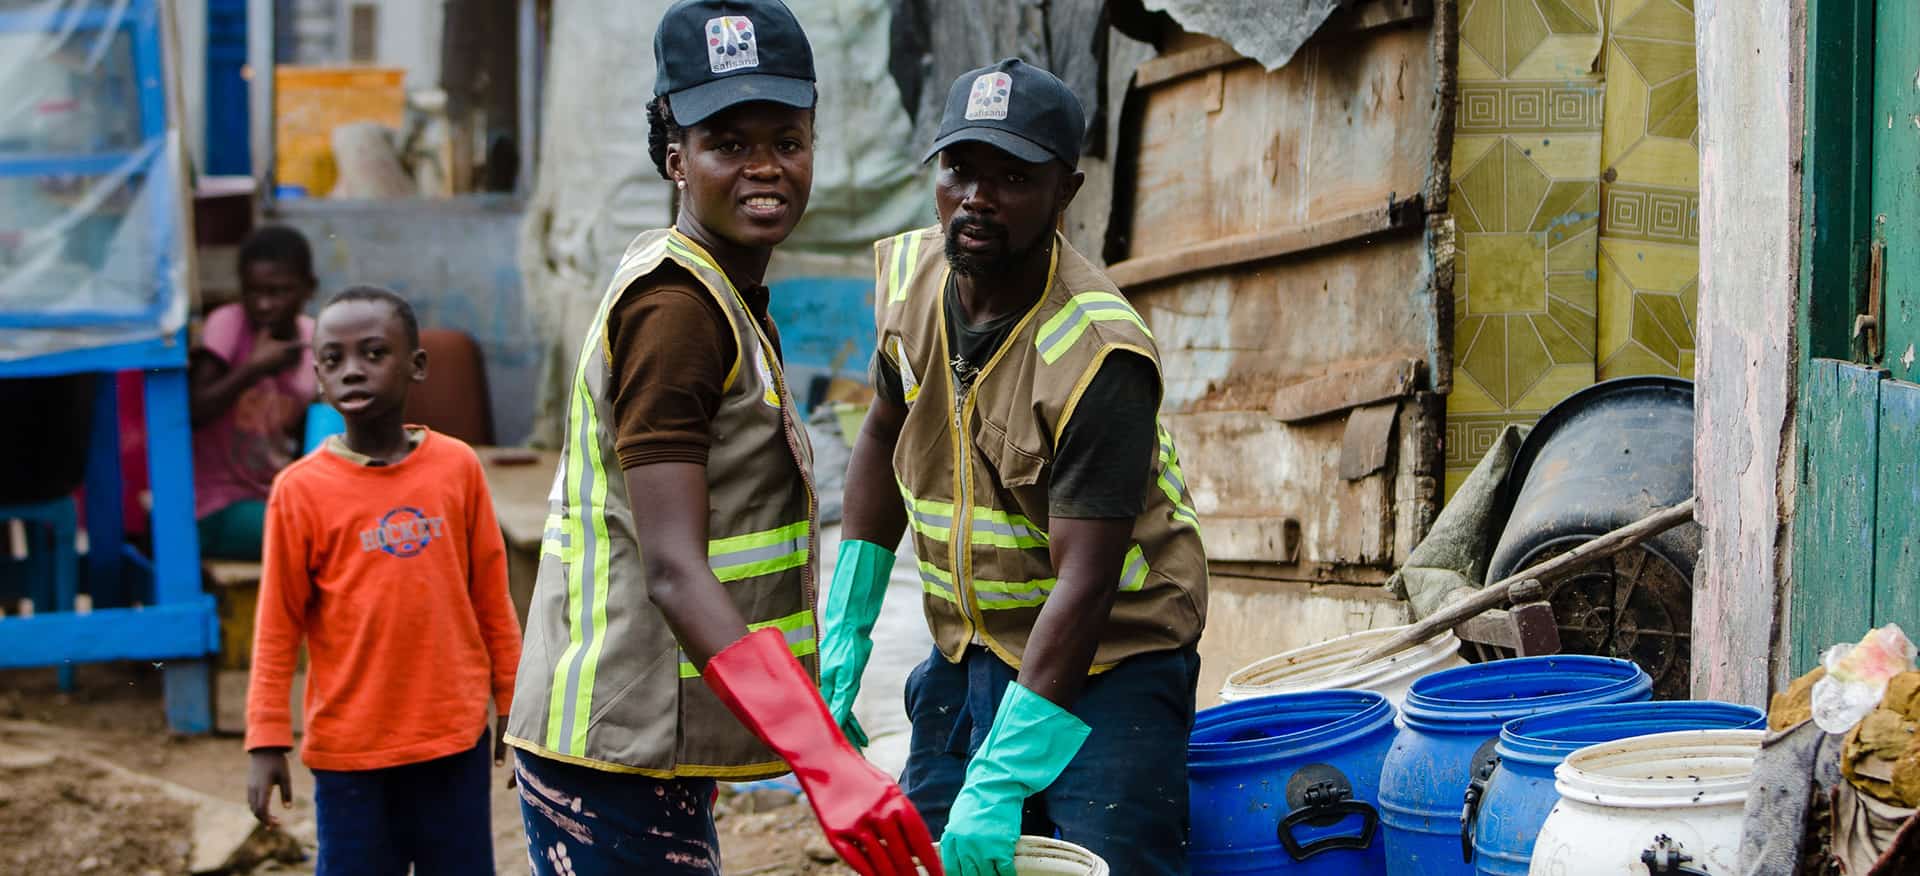 Safisana workers at the main recycling plant in Accra.